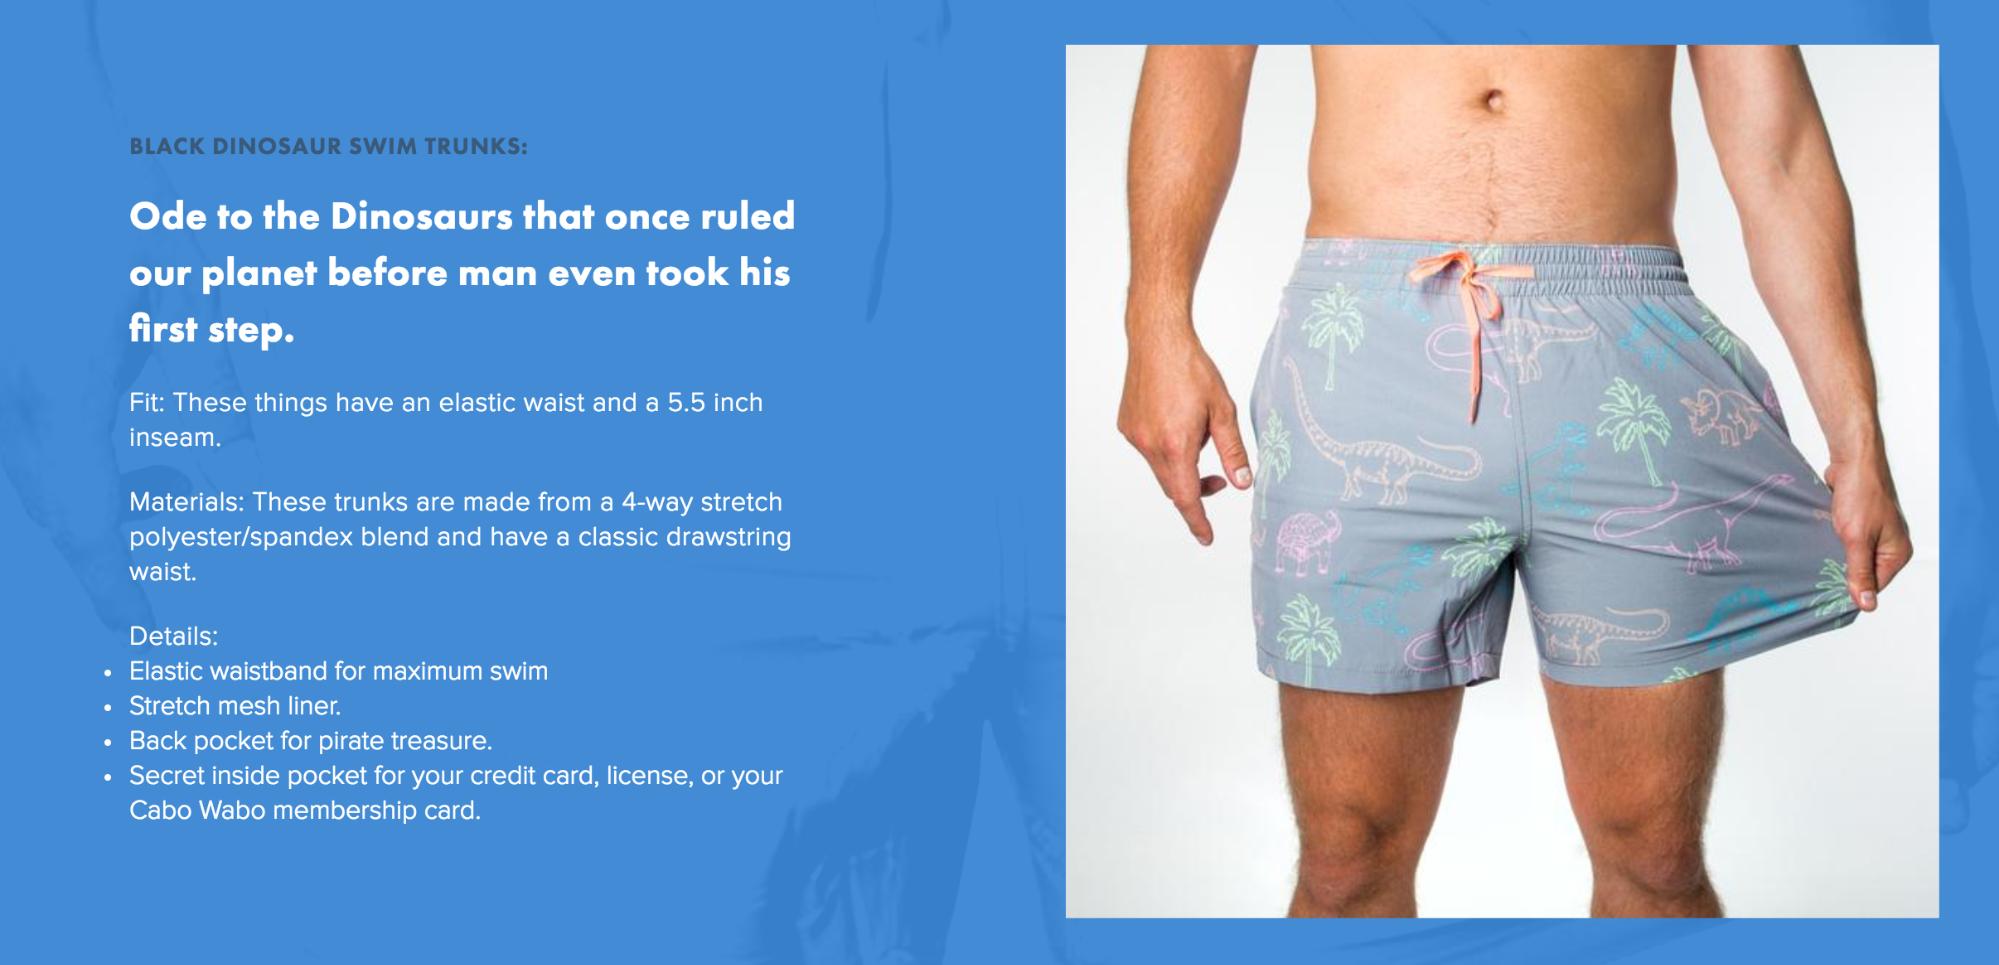 Example of a clothing product page with detailed descriptions.